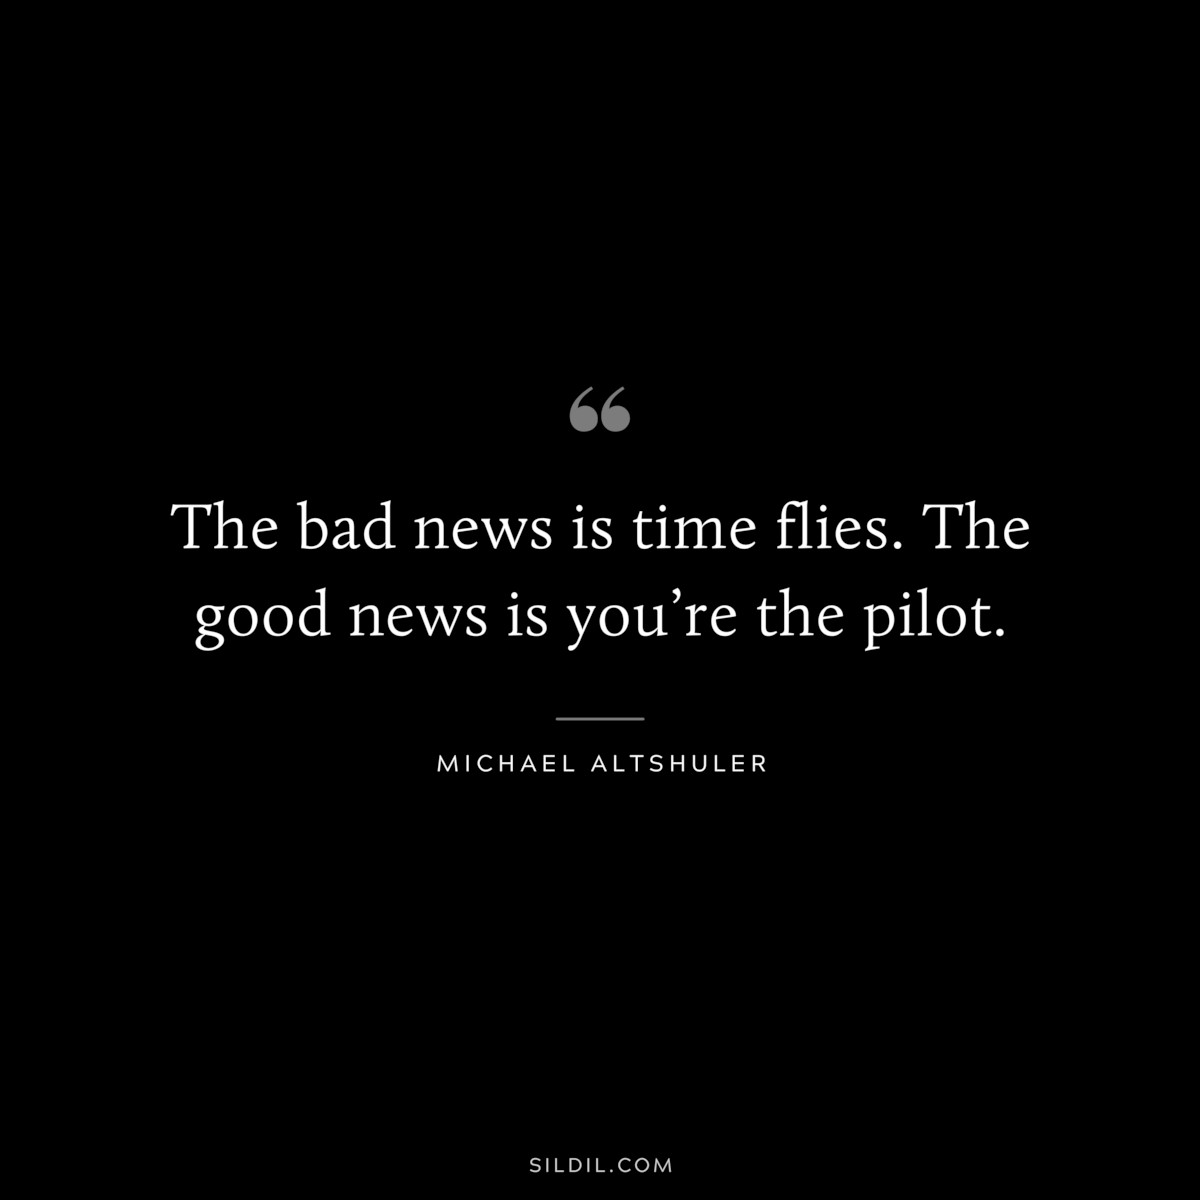 The bad news is time flies. The good news is you’re the pilot. ― Michael Altshuler